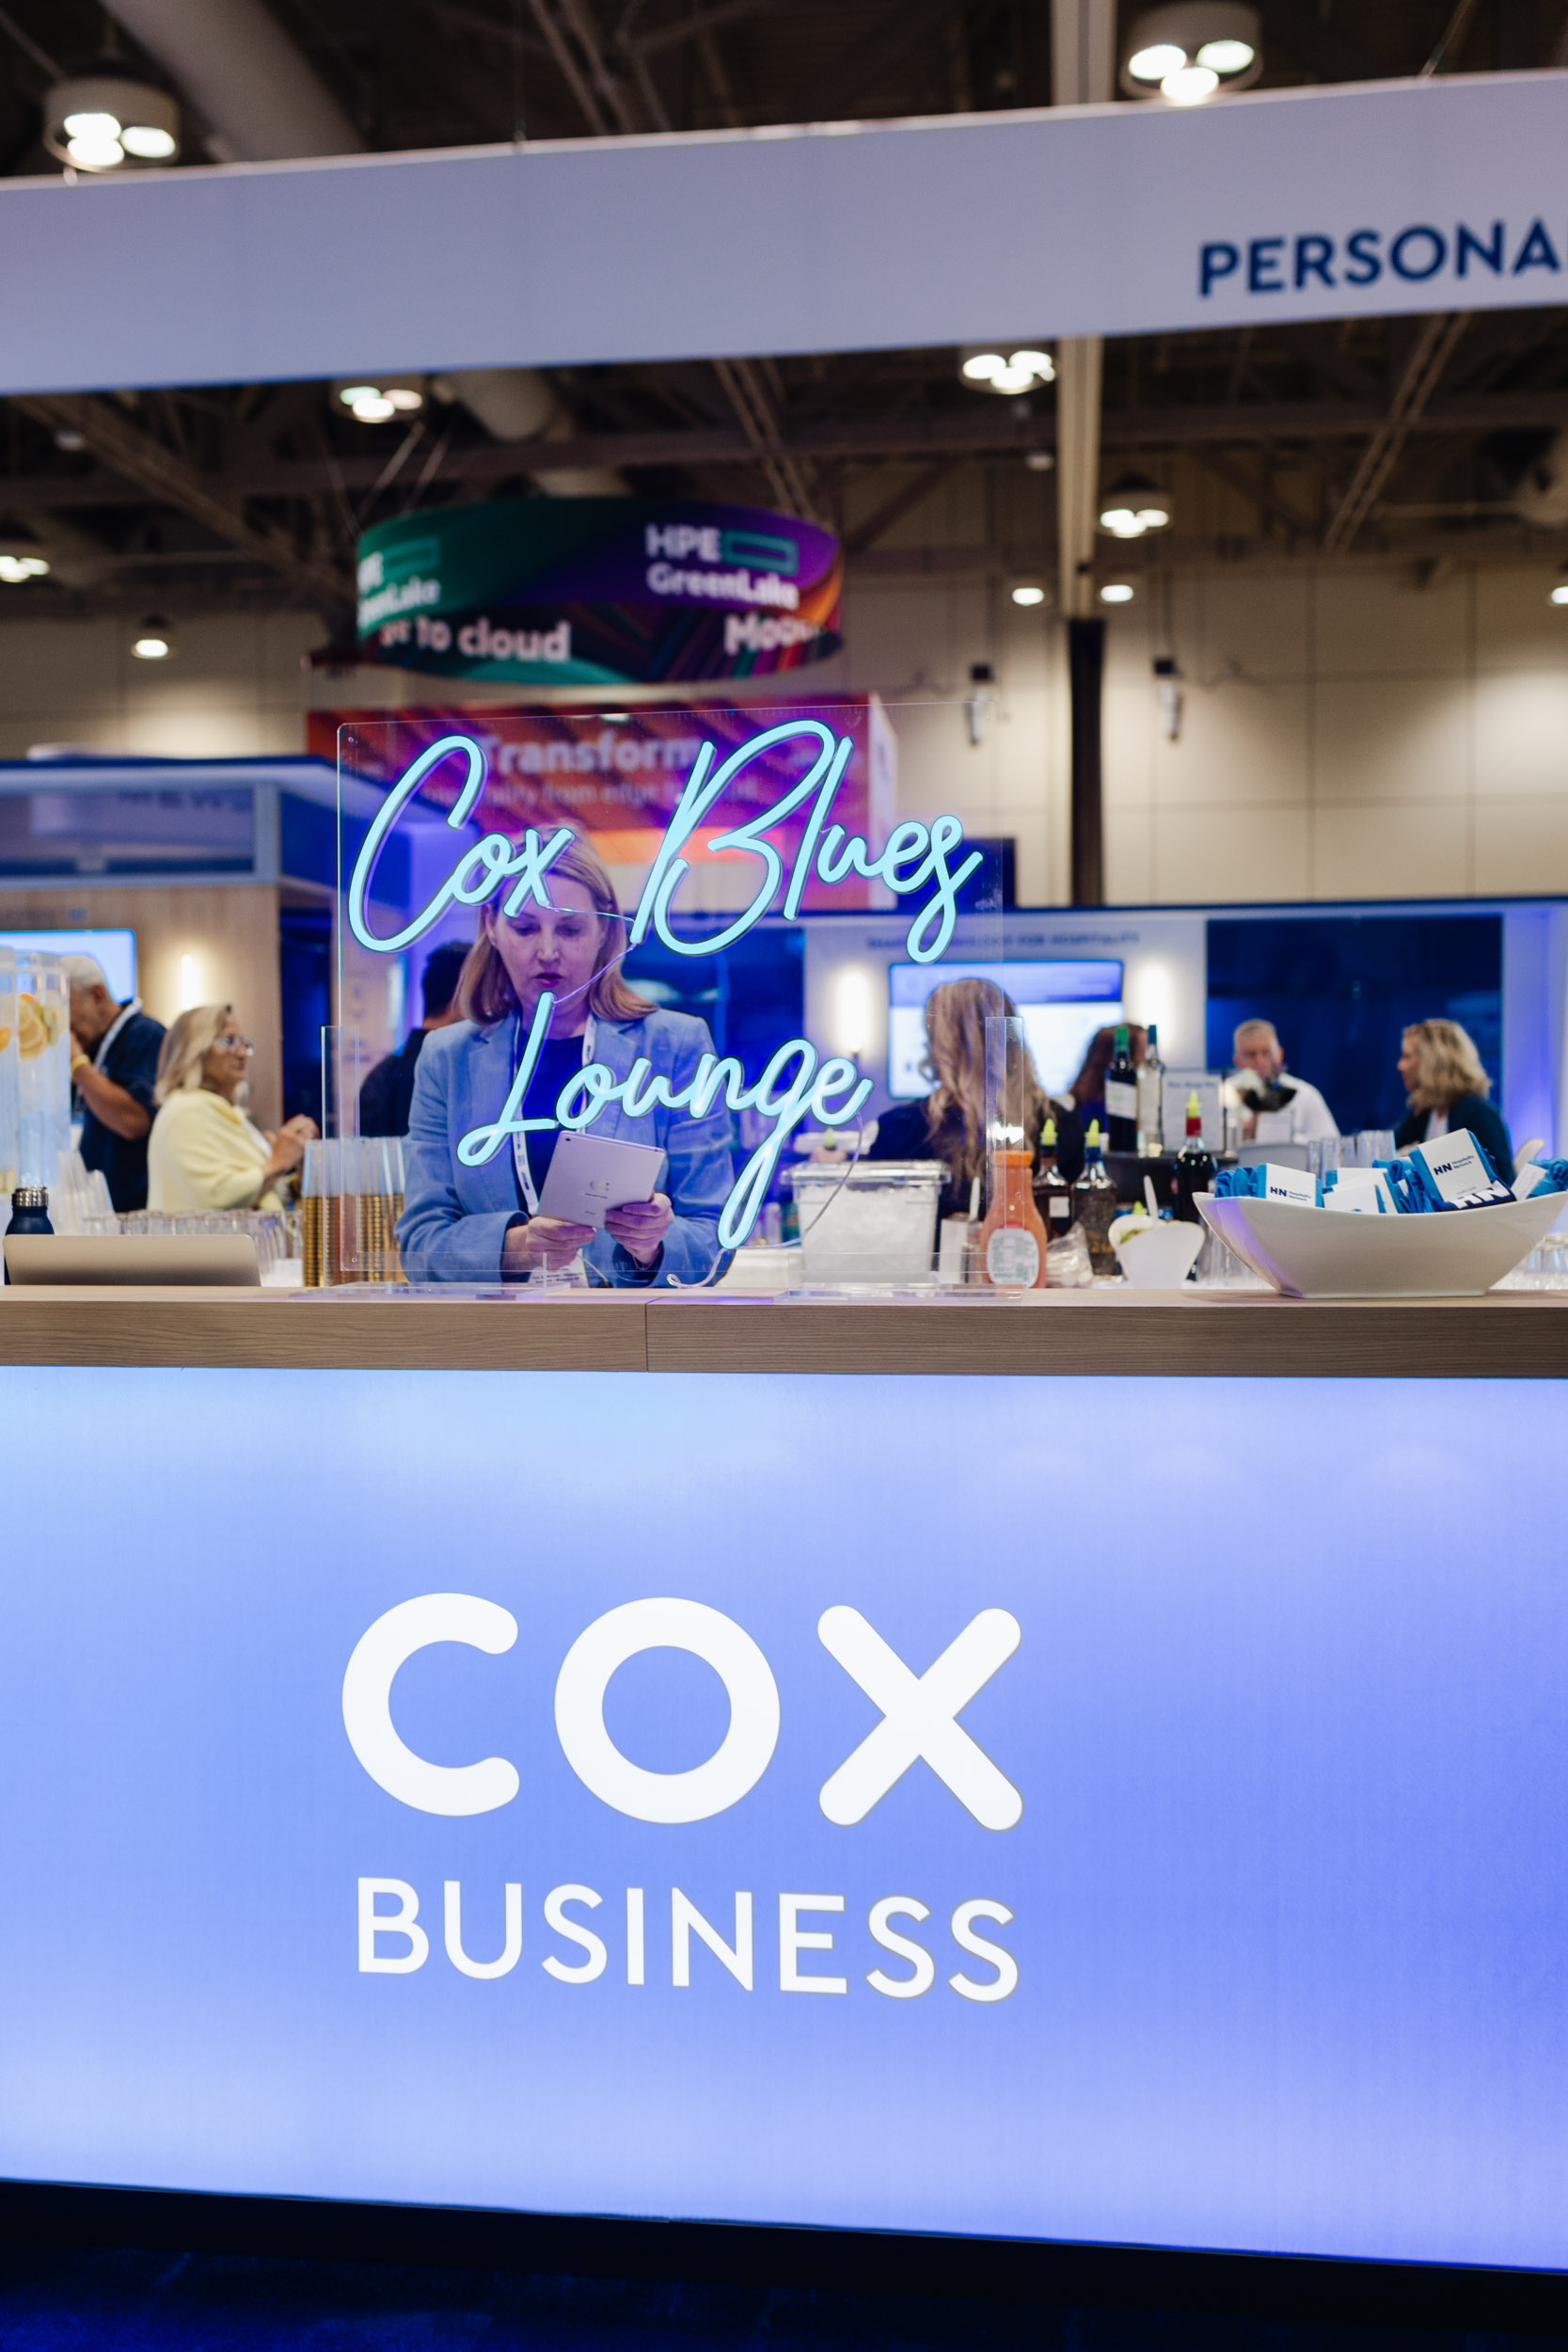 Cox Business booth showcasing at a Toronto trade show.